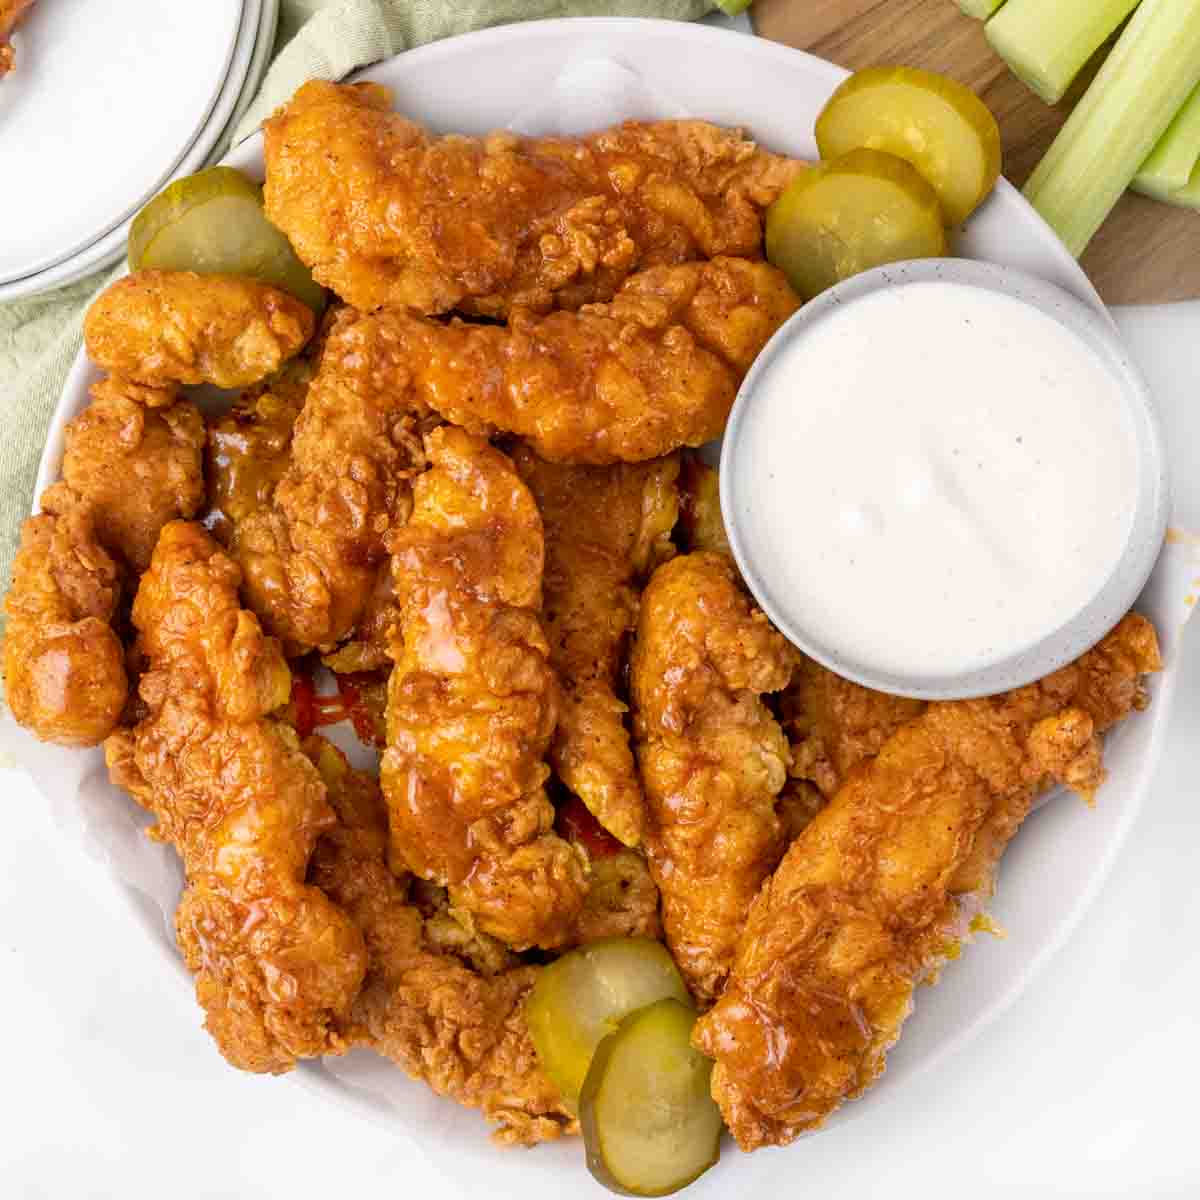 Nashville hot chicken tenders with pickles and bleu cheese dressing.